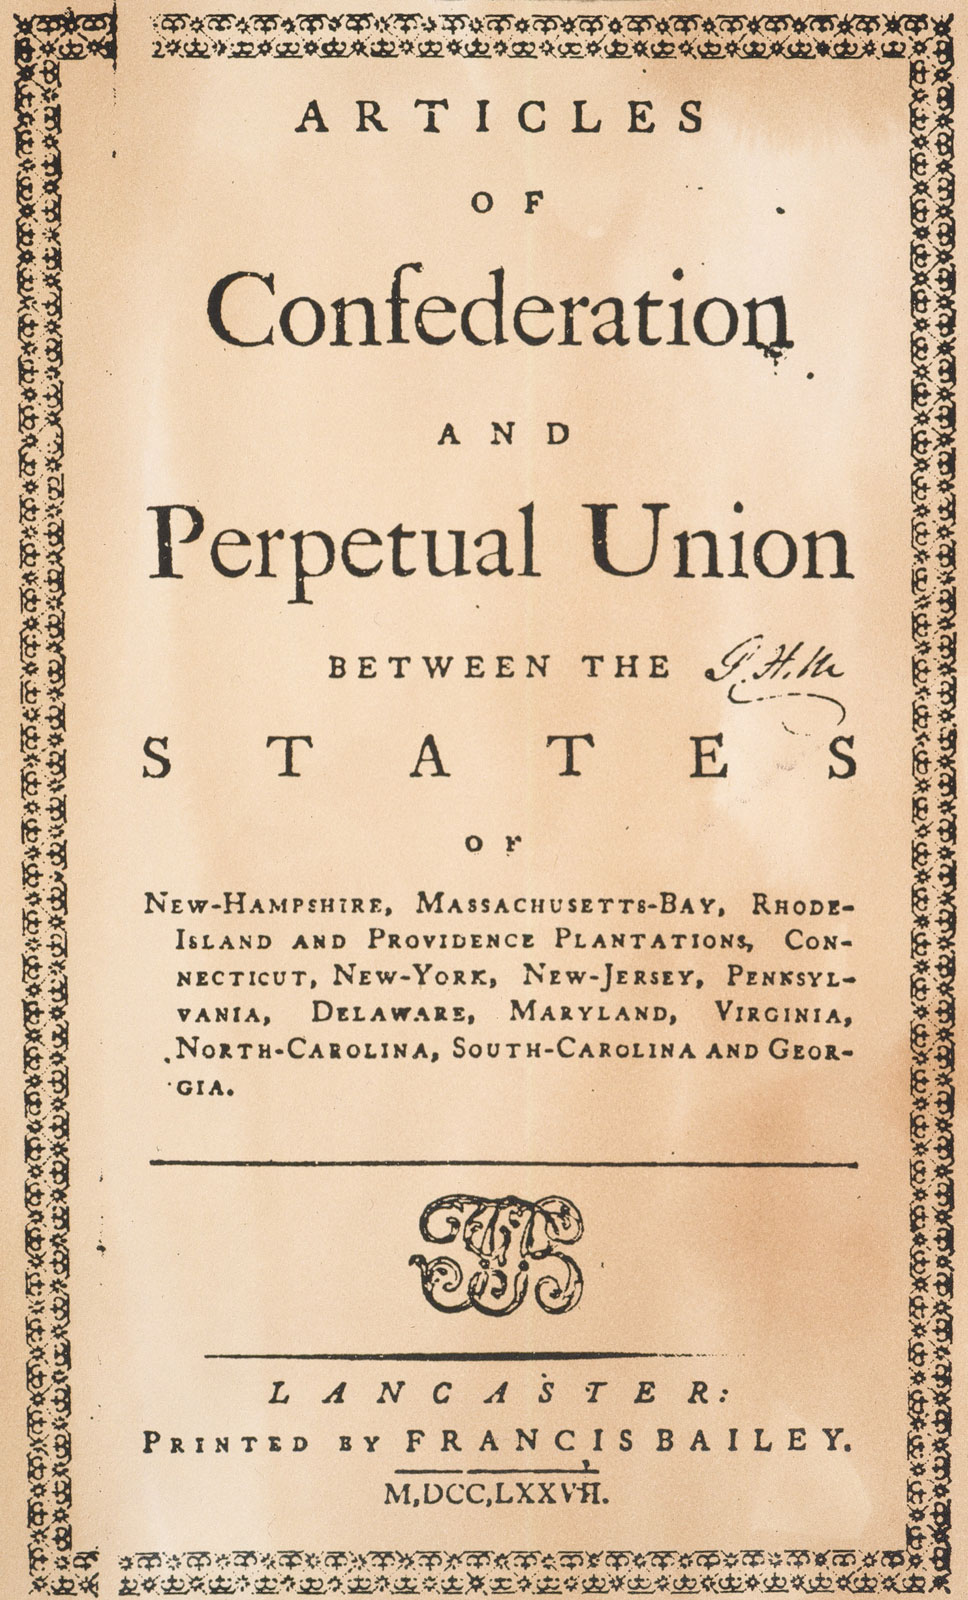 Articles of Confederation - title page